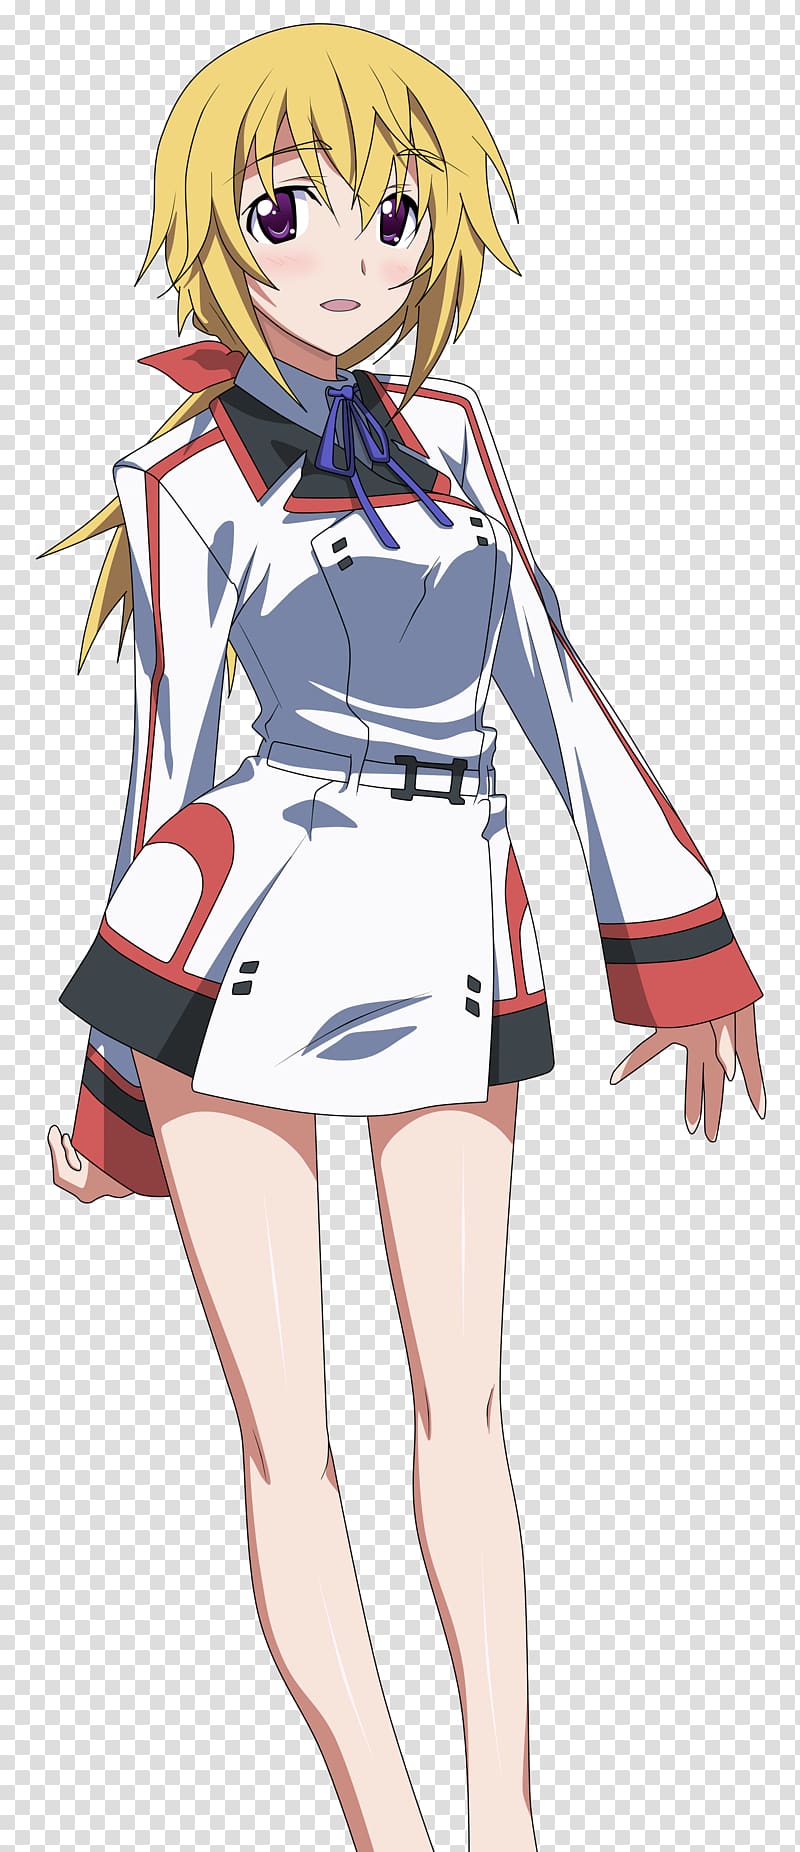 Infinite Stratos Anime Nendoroid Wikia Mobile Phones, others transparent background PNG clipart